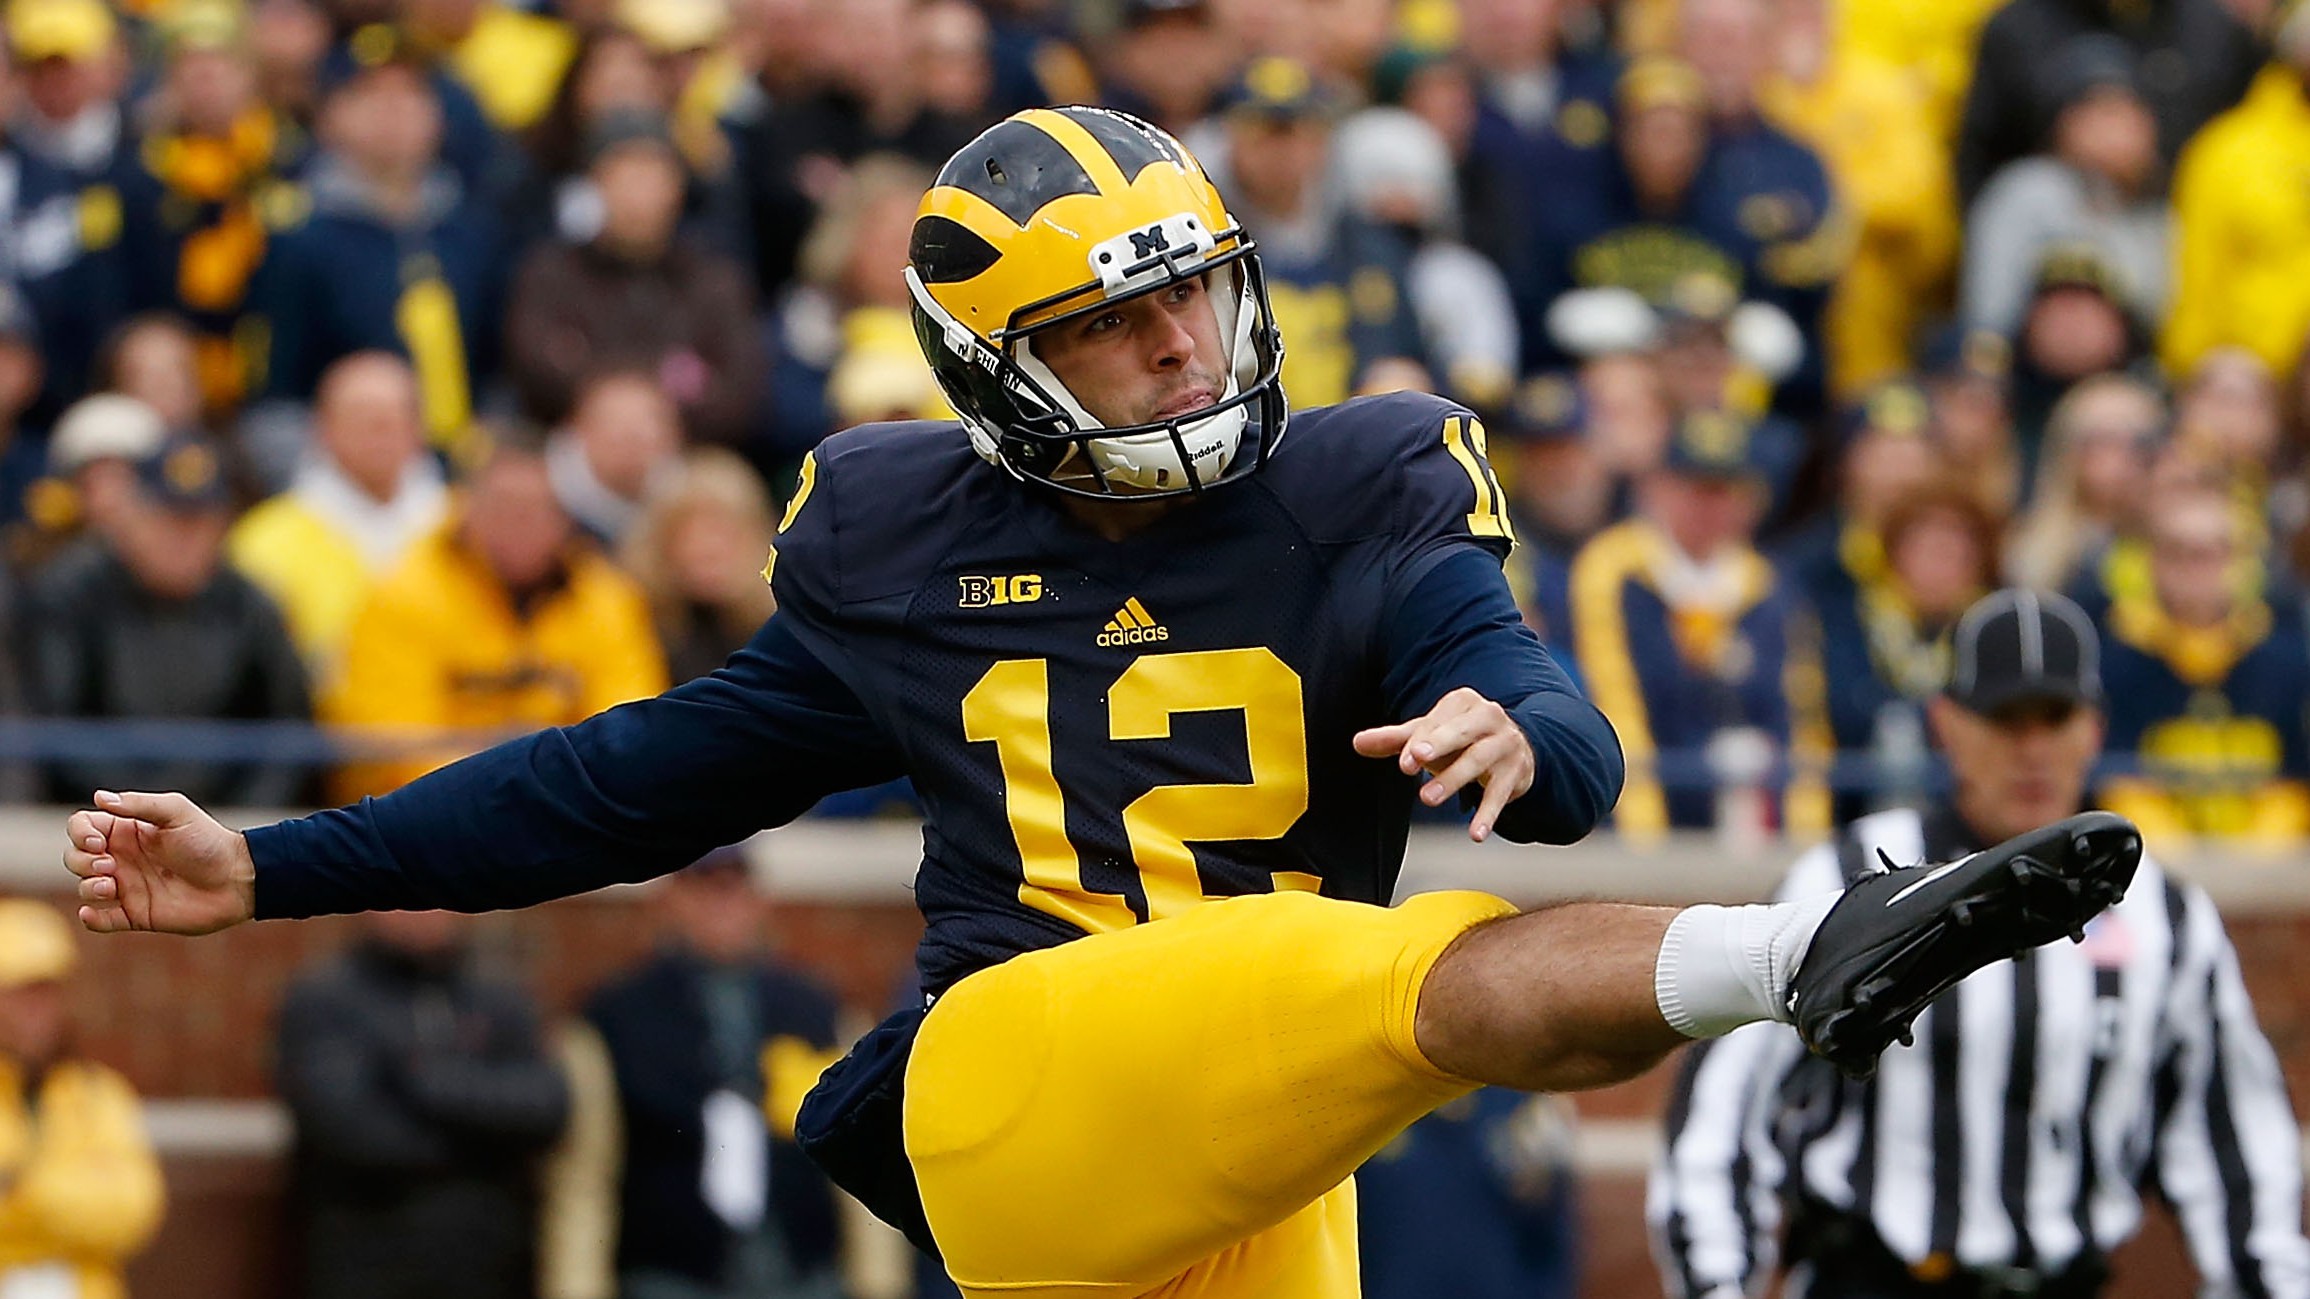 Blake O’Neill, Michigan Punter 5 Fast Facts You Need to Know